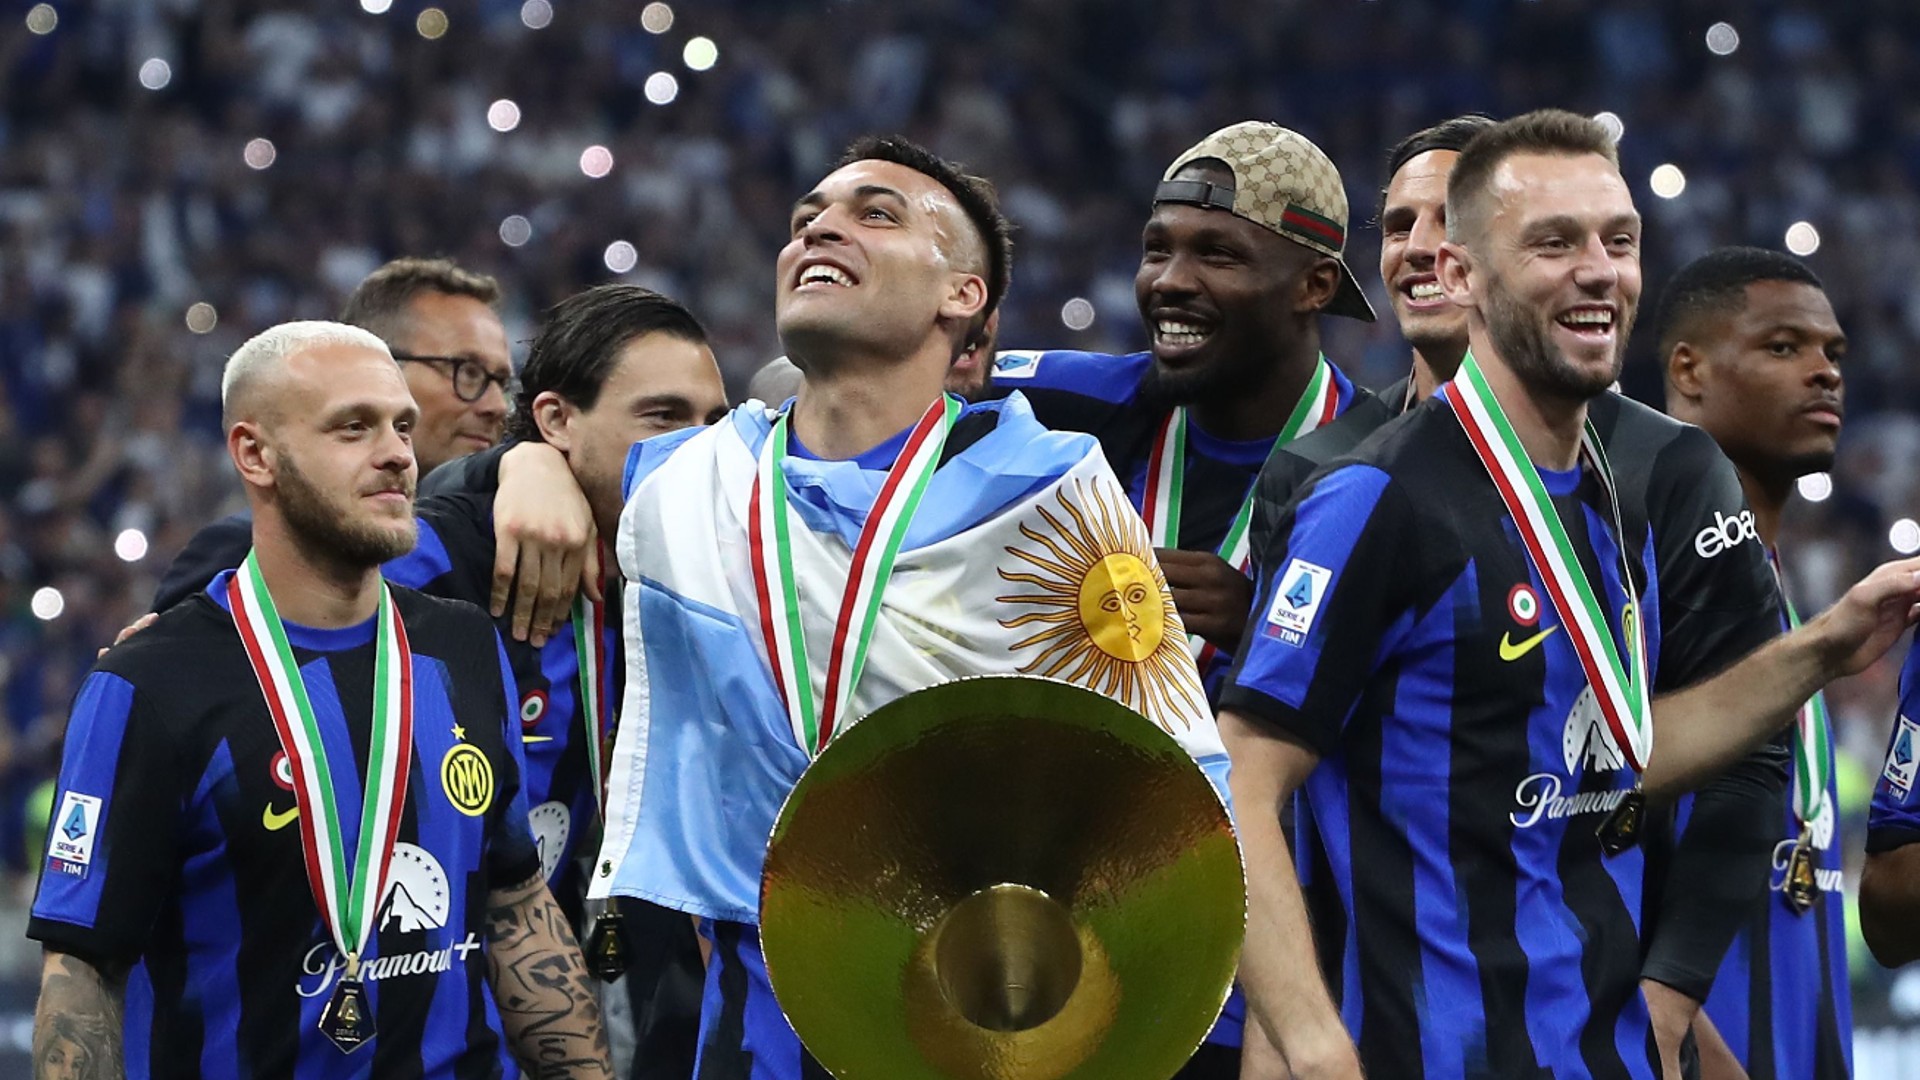 Serie A champions Inter taken over